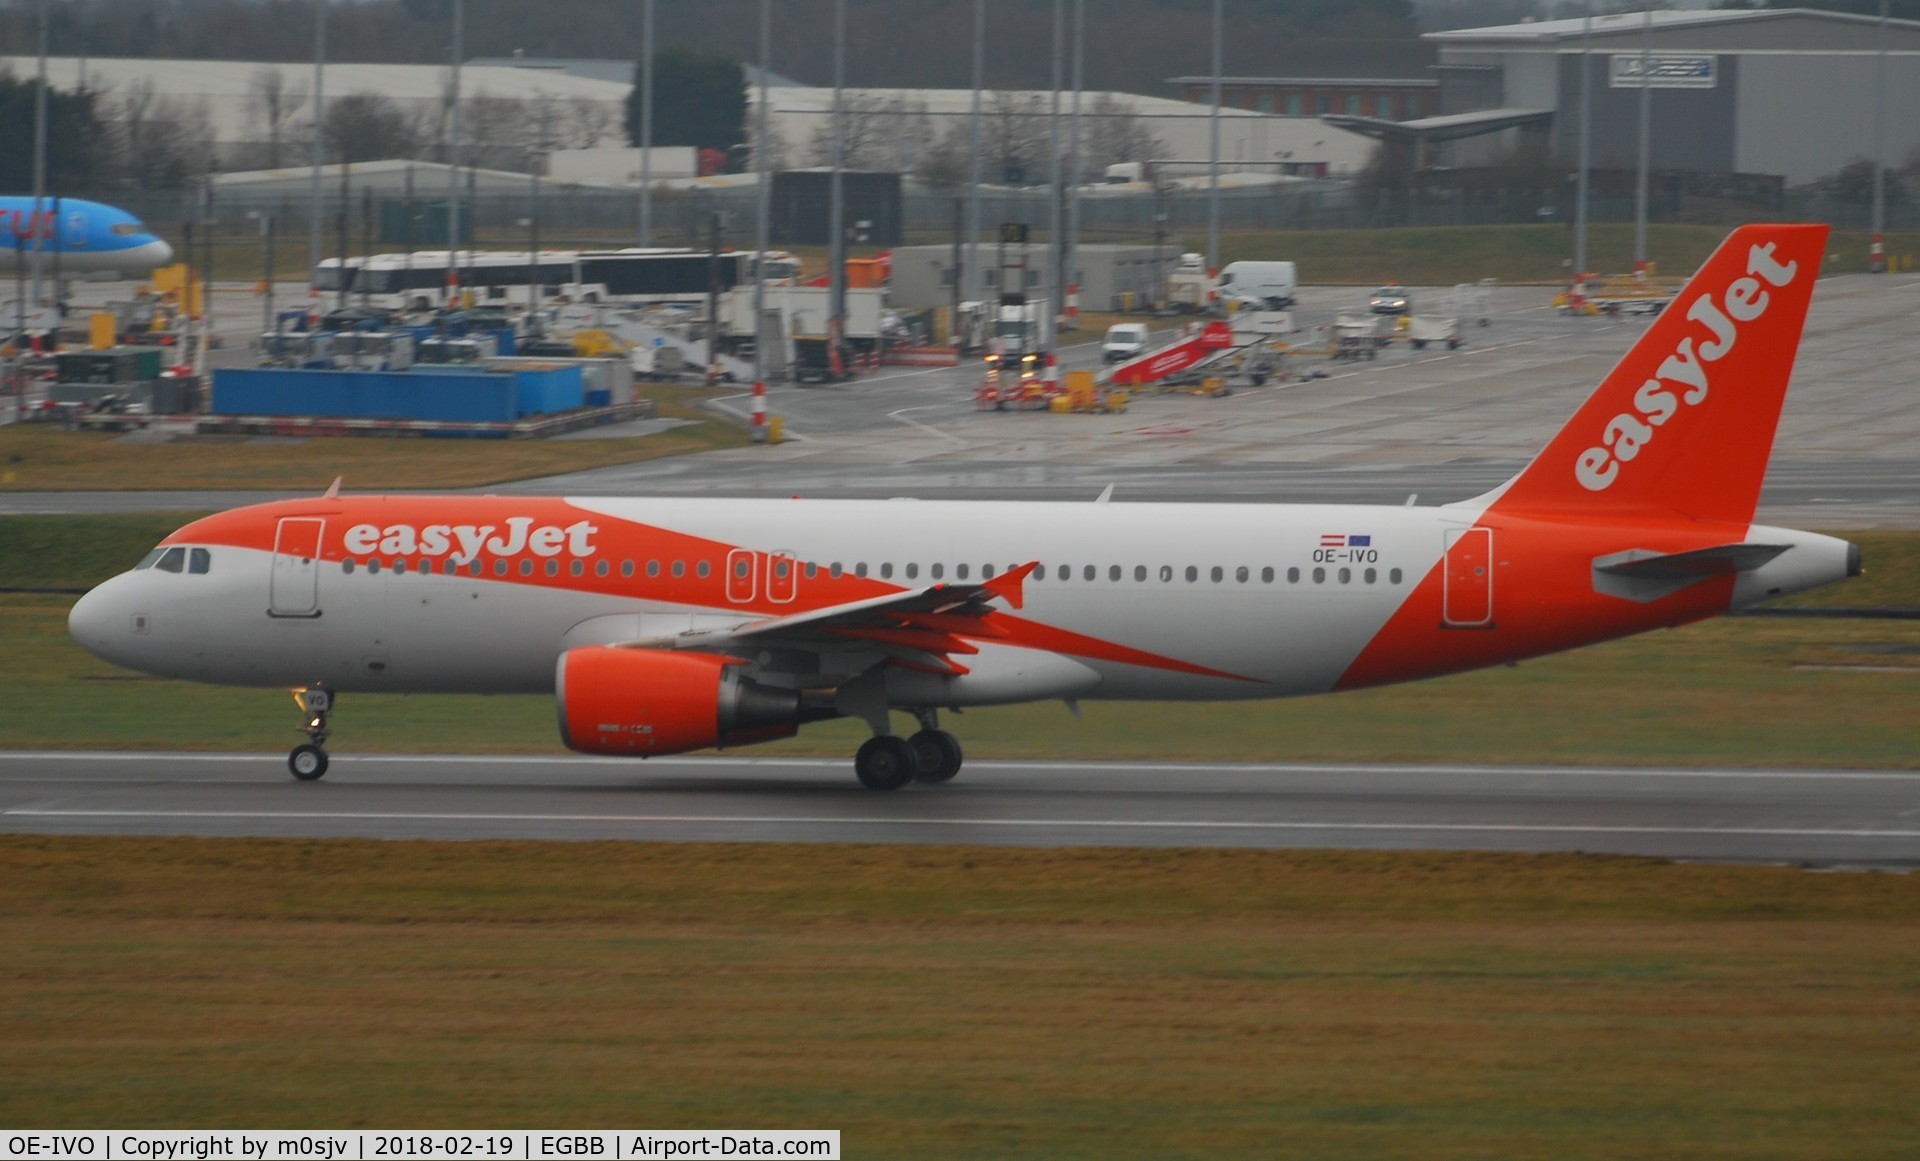 OE-IVO, 2009 Airbus A320-214 C/N 3979, Taken from Freeport Carpark